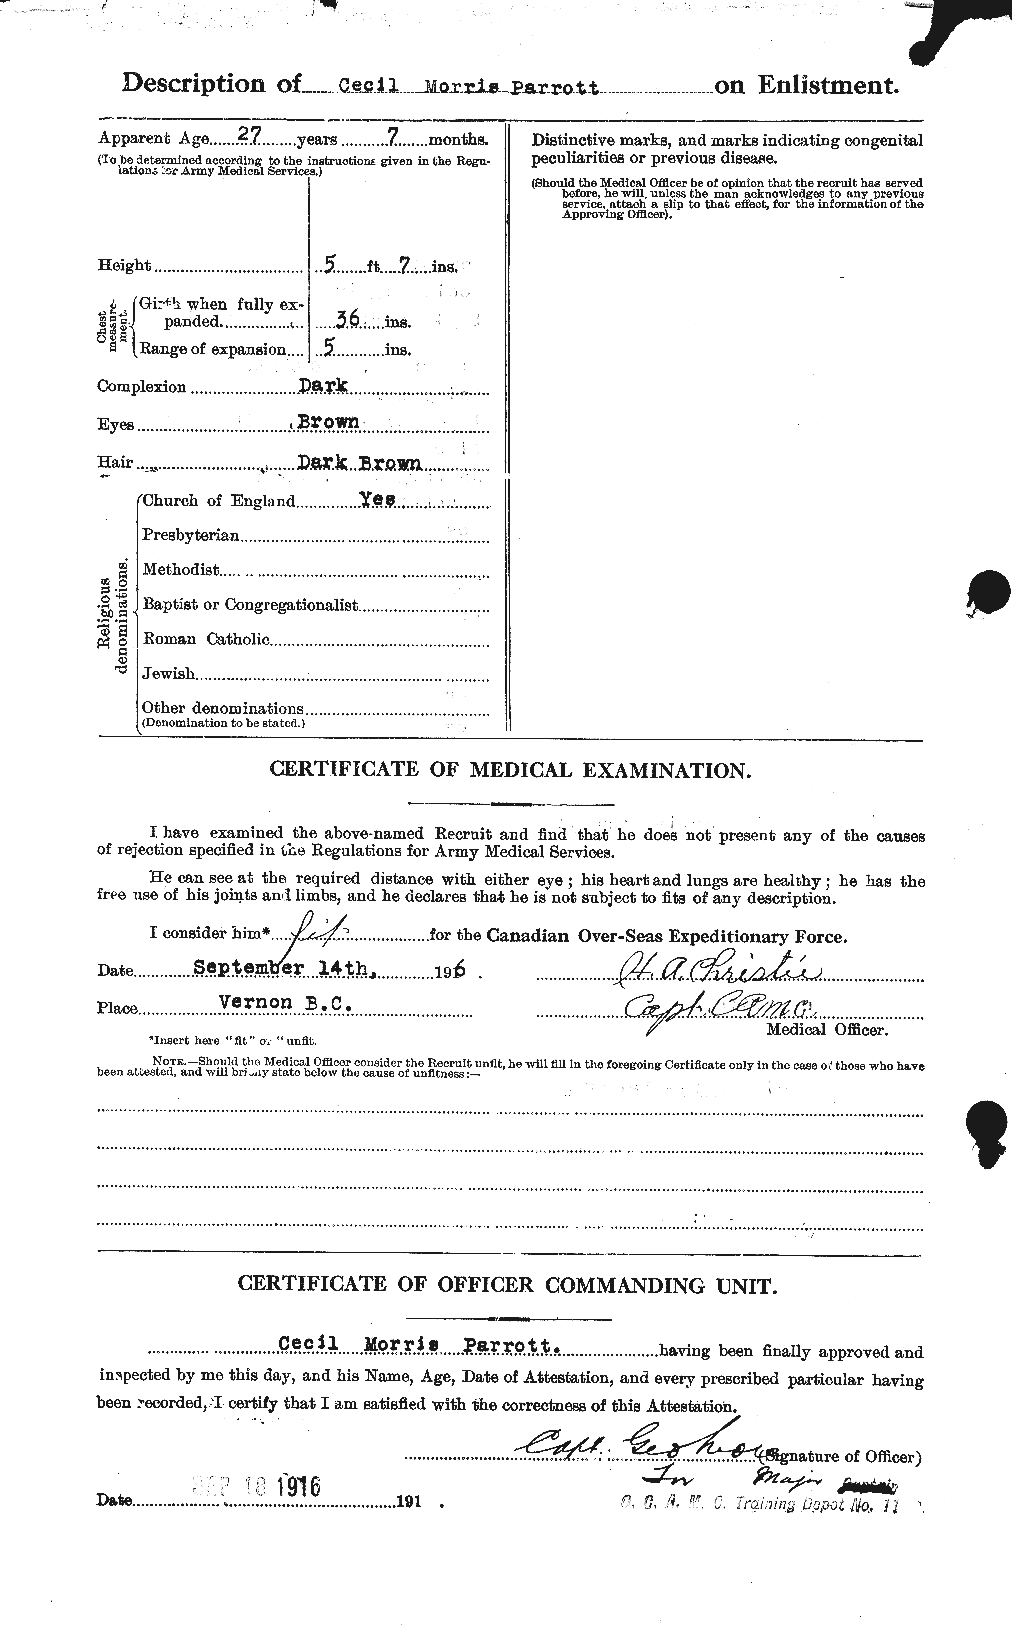 Personnel Records of the First World War - CEF 566550b